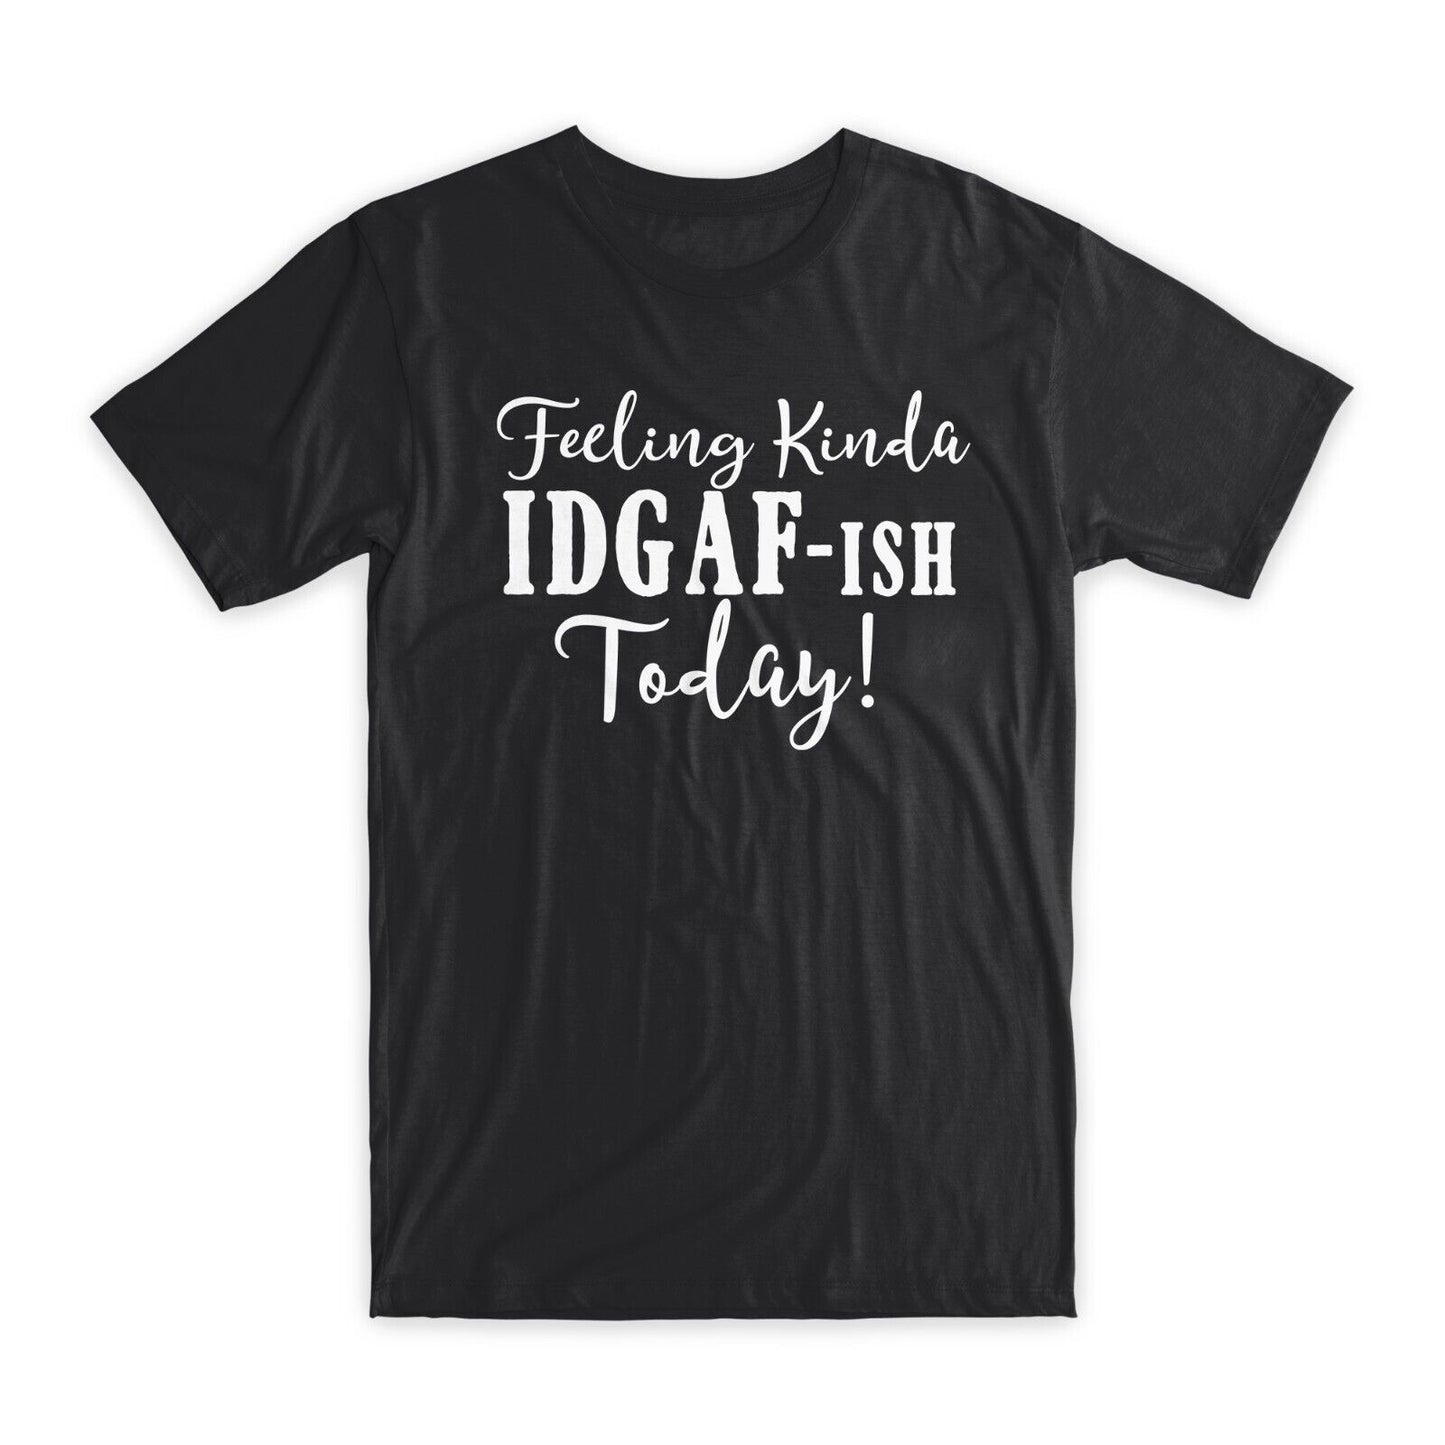 Feeling Kind A Idgaf-Ish Today T-Shirt Premium Soft Cotton Funny Tees Gifts NEW